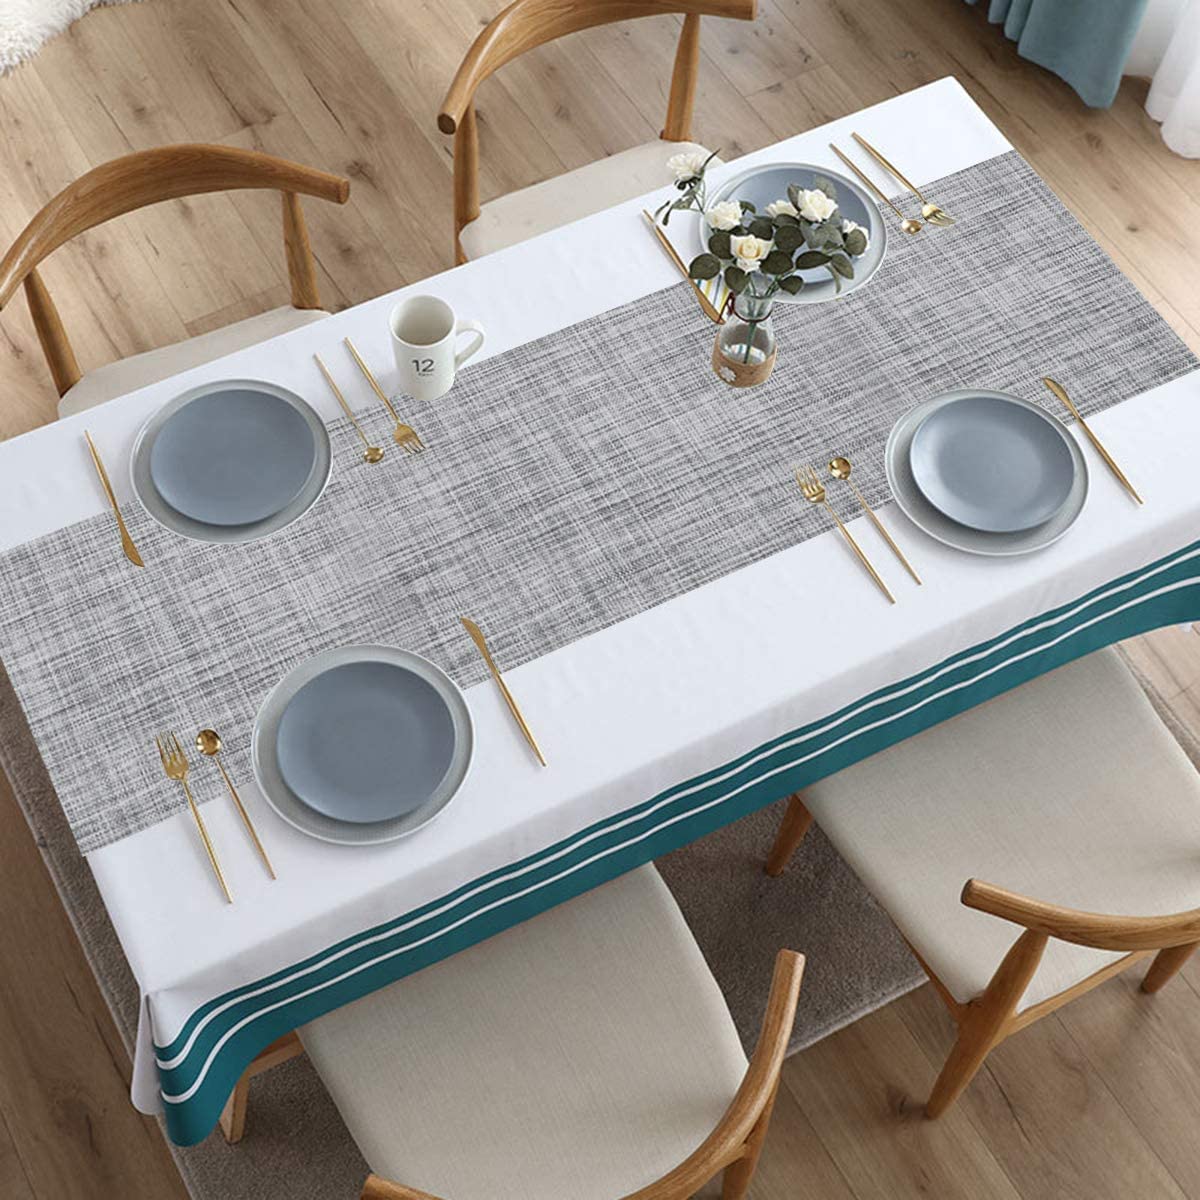 Dim Grey 6 Dining Table Mats with 1 Runner Dining Table Mats With Runner- #Royalkart#best dining table placemats